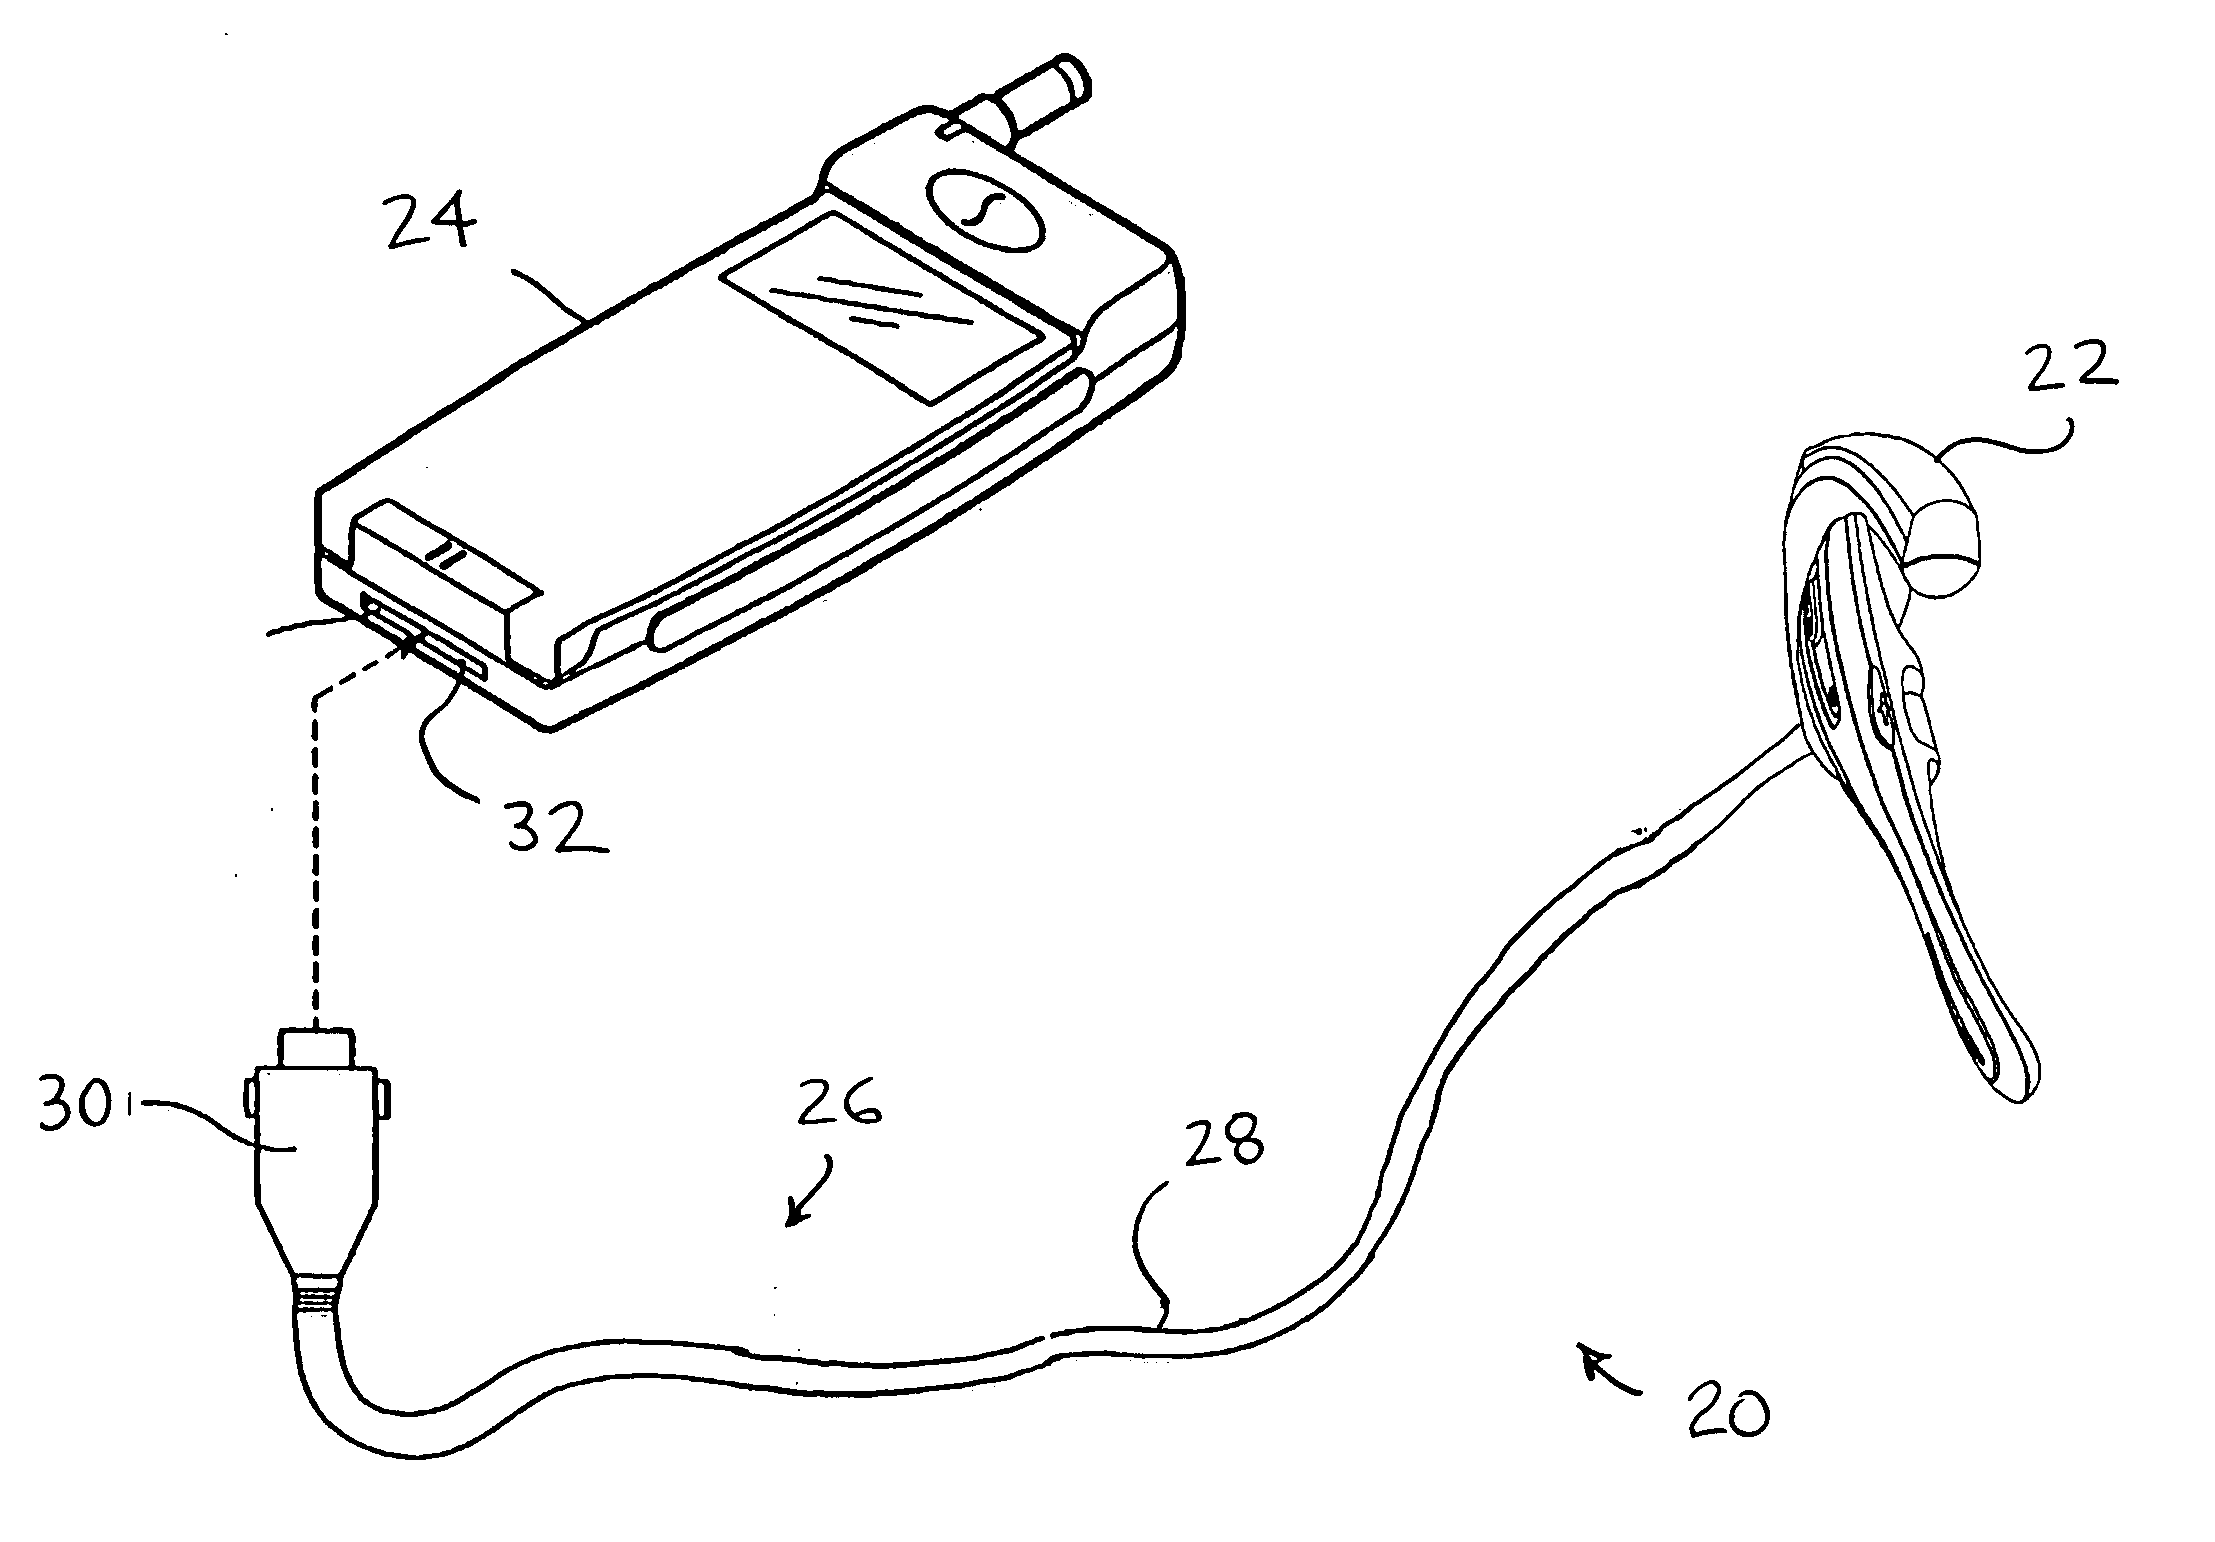 Cord control and accessories having cord control for use with portable electronic devices